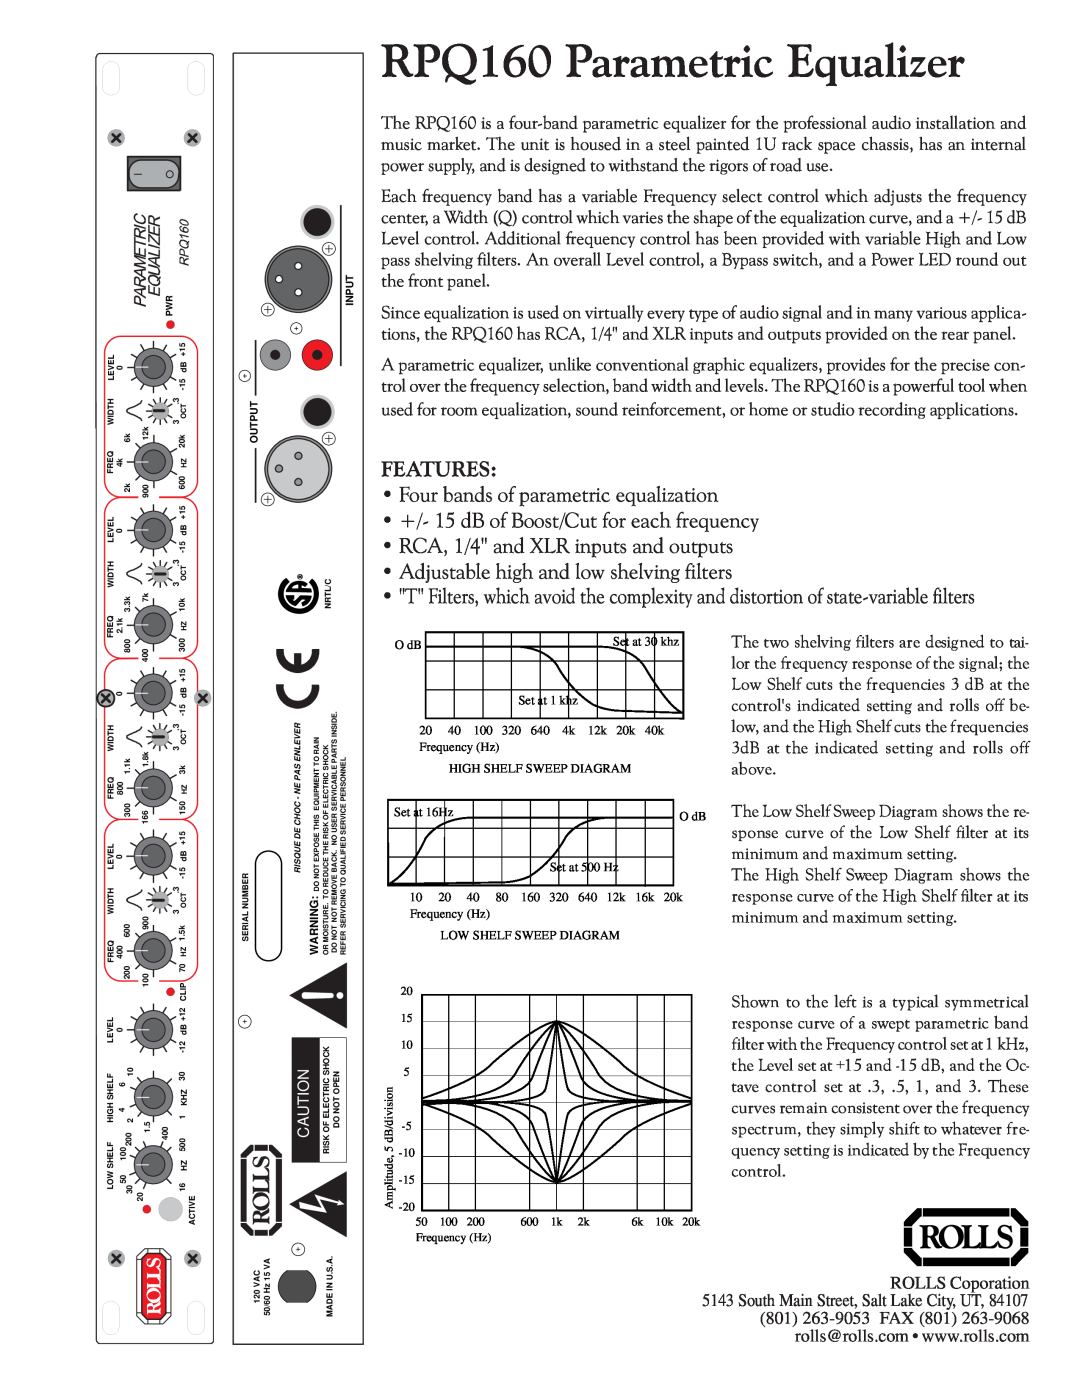 Rolls manual RPQ160 Parametric Equalizer, FEATURES Four bands of parametric equalization 